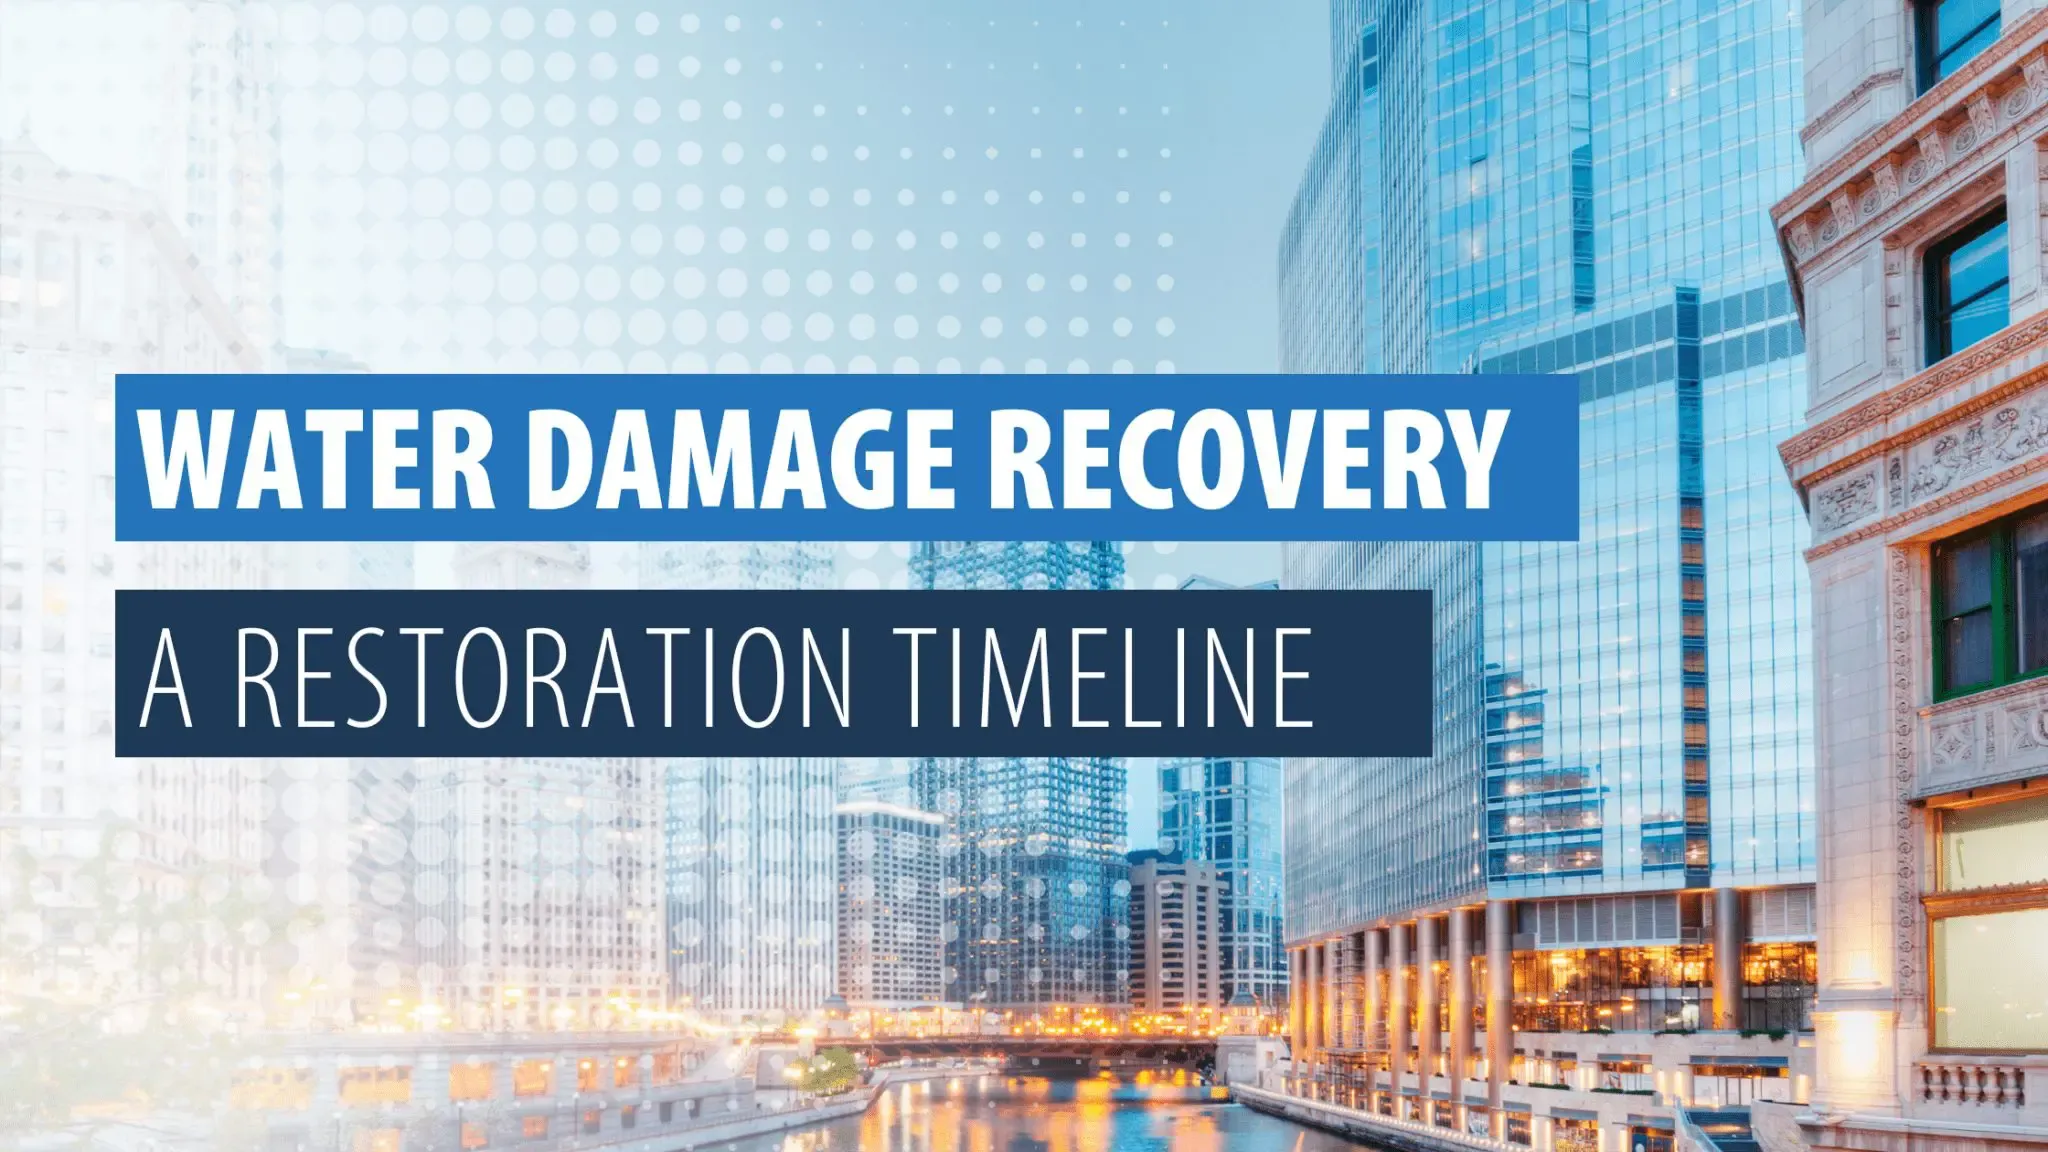 Water Damage Recovery: A Restoration Timeline